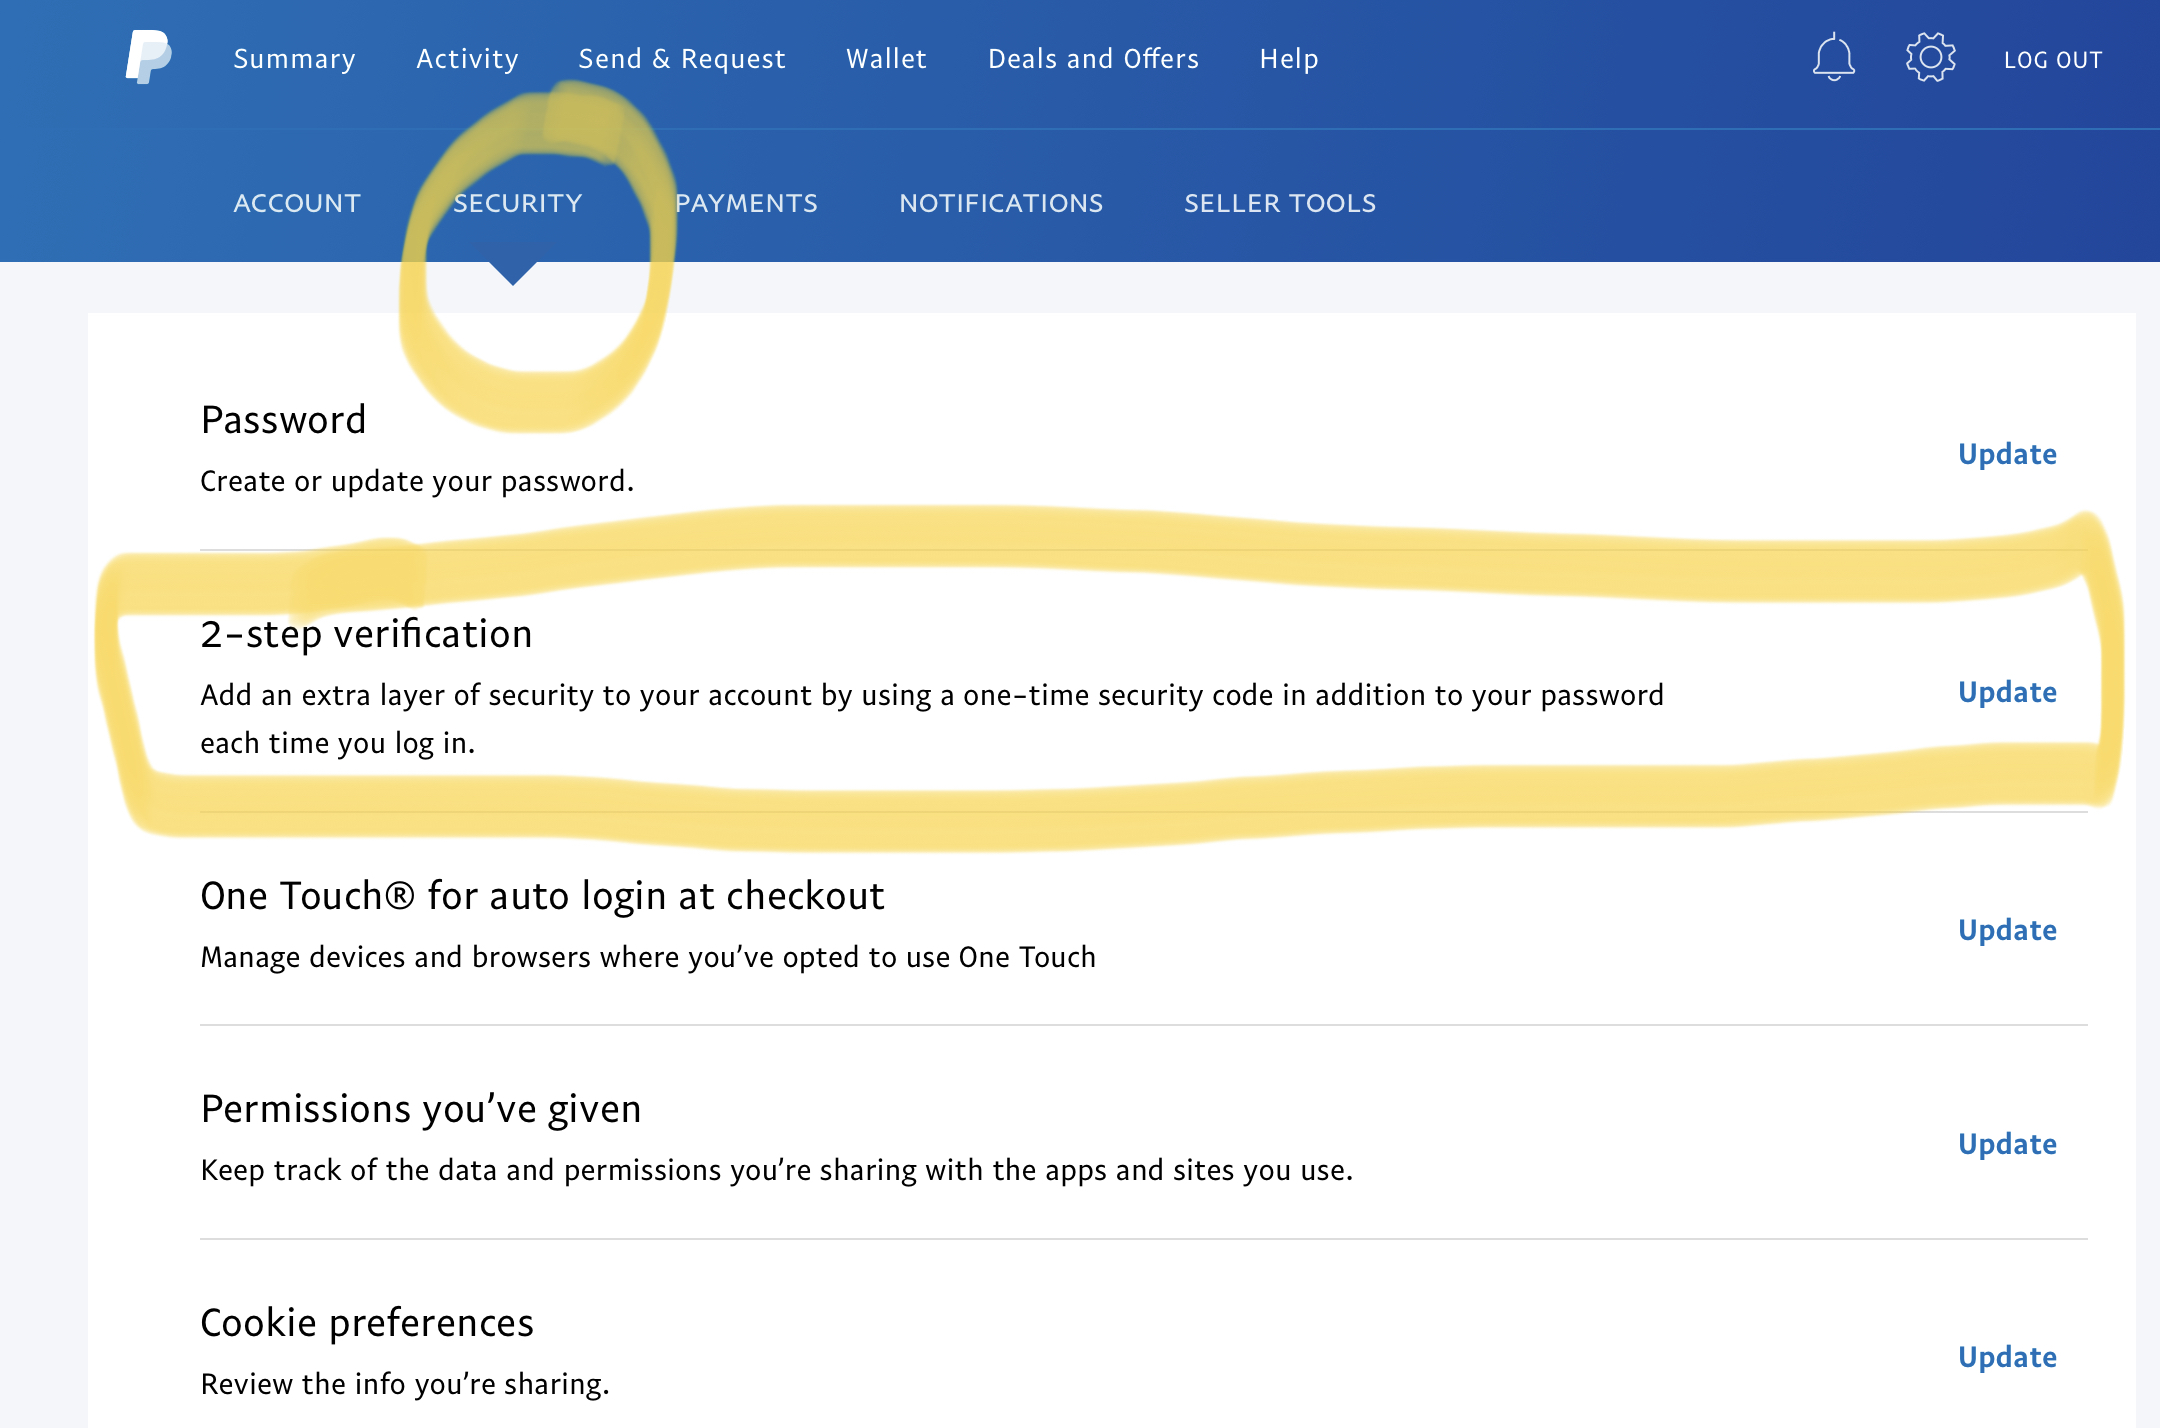 Solved: Security check - Verify your account - PayPal Community